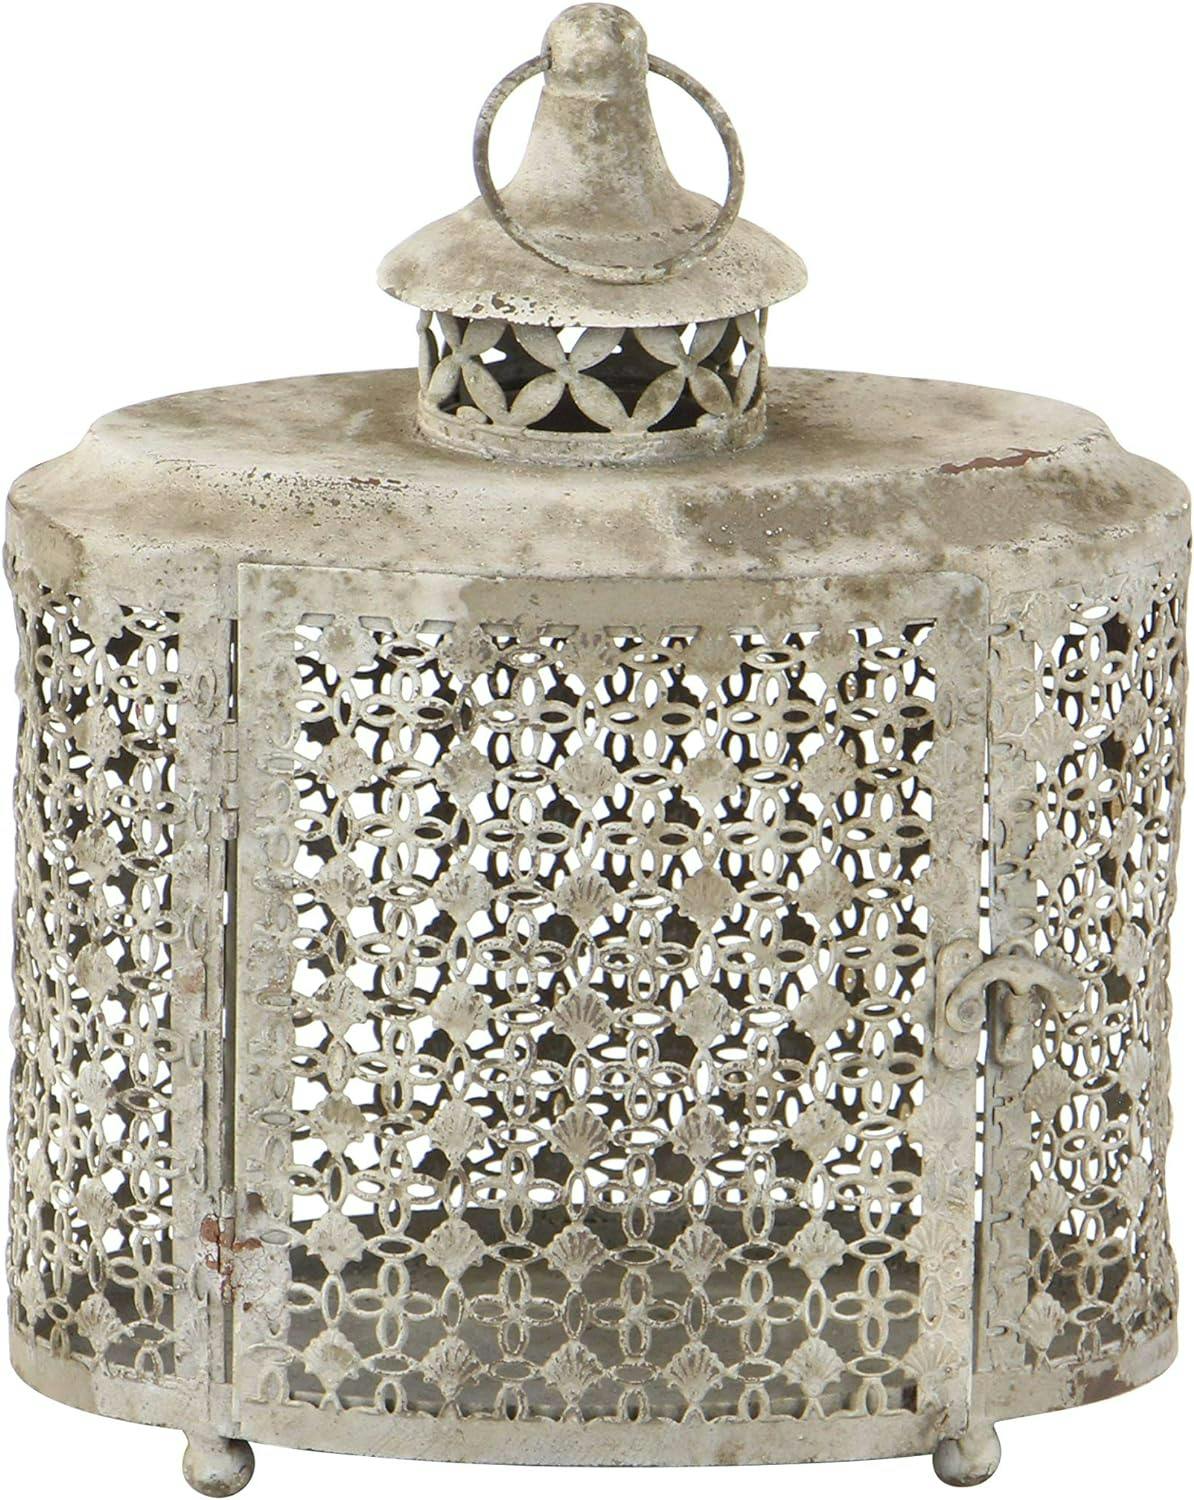 Rustic Beige Metal Candle Lantern Set with Intricate Scroll Work